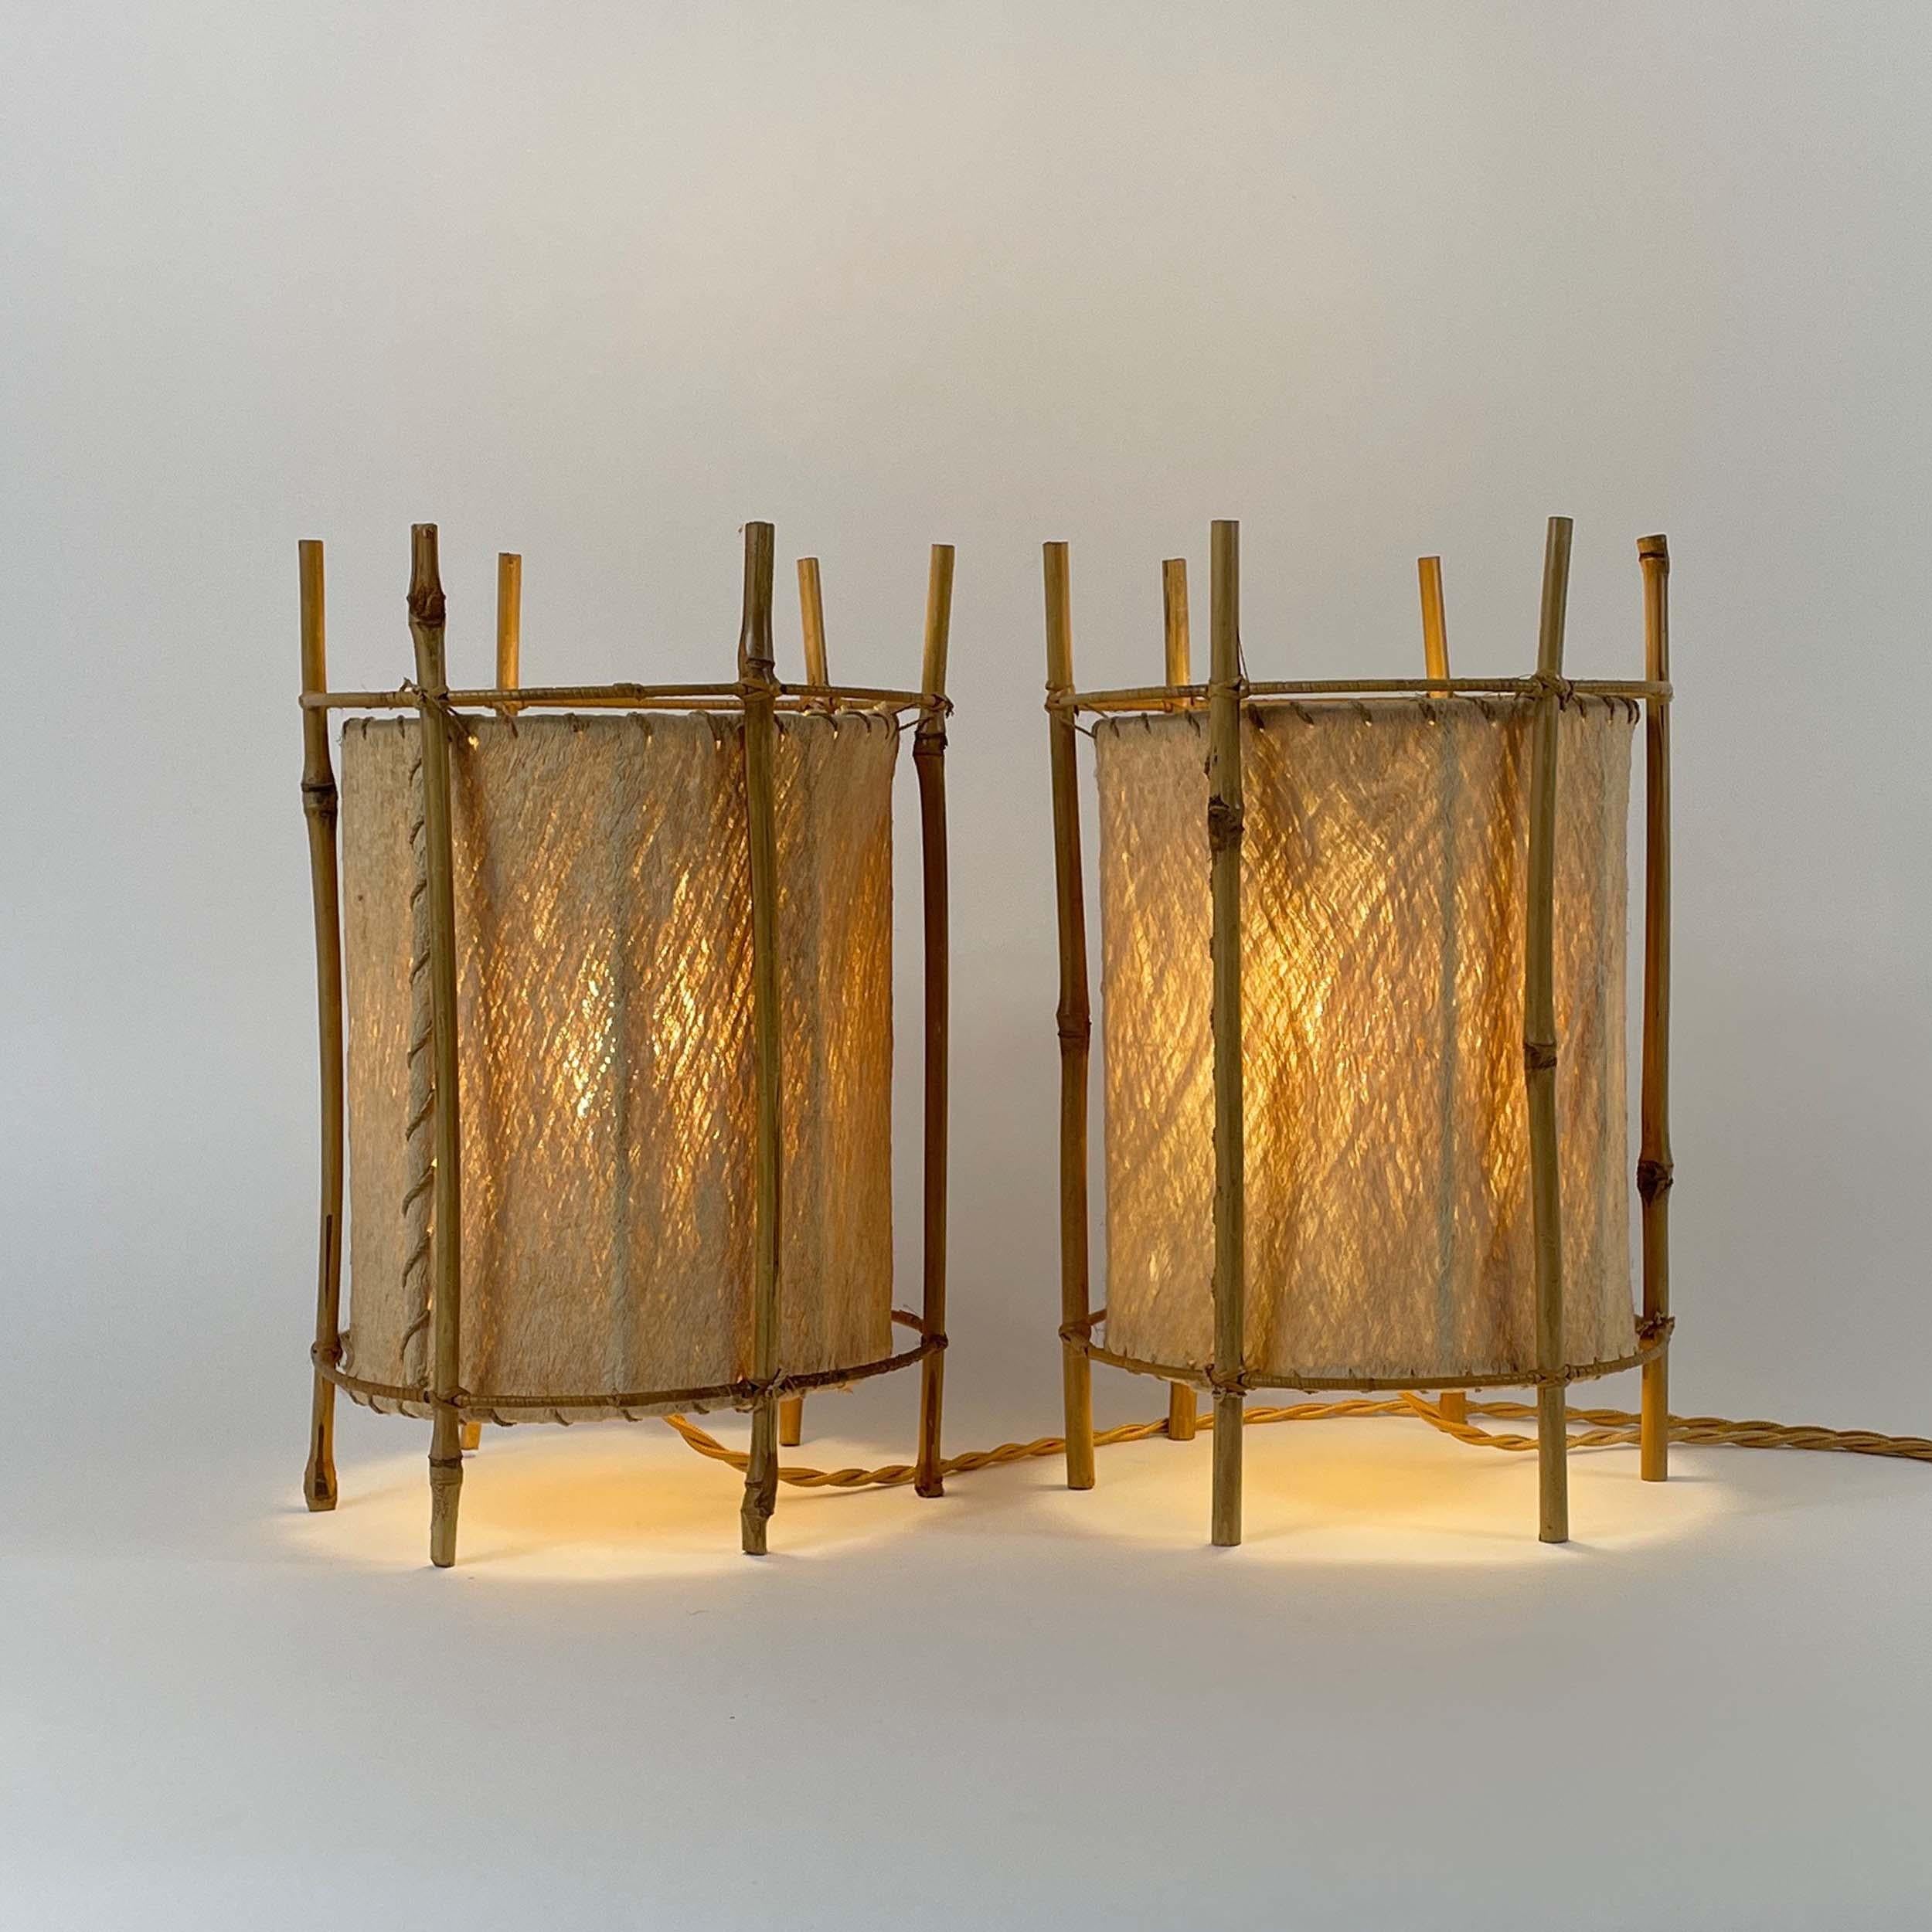 Louis Sognot Bamboo & Parchment Table Lamps, France 1950s For Sale 1